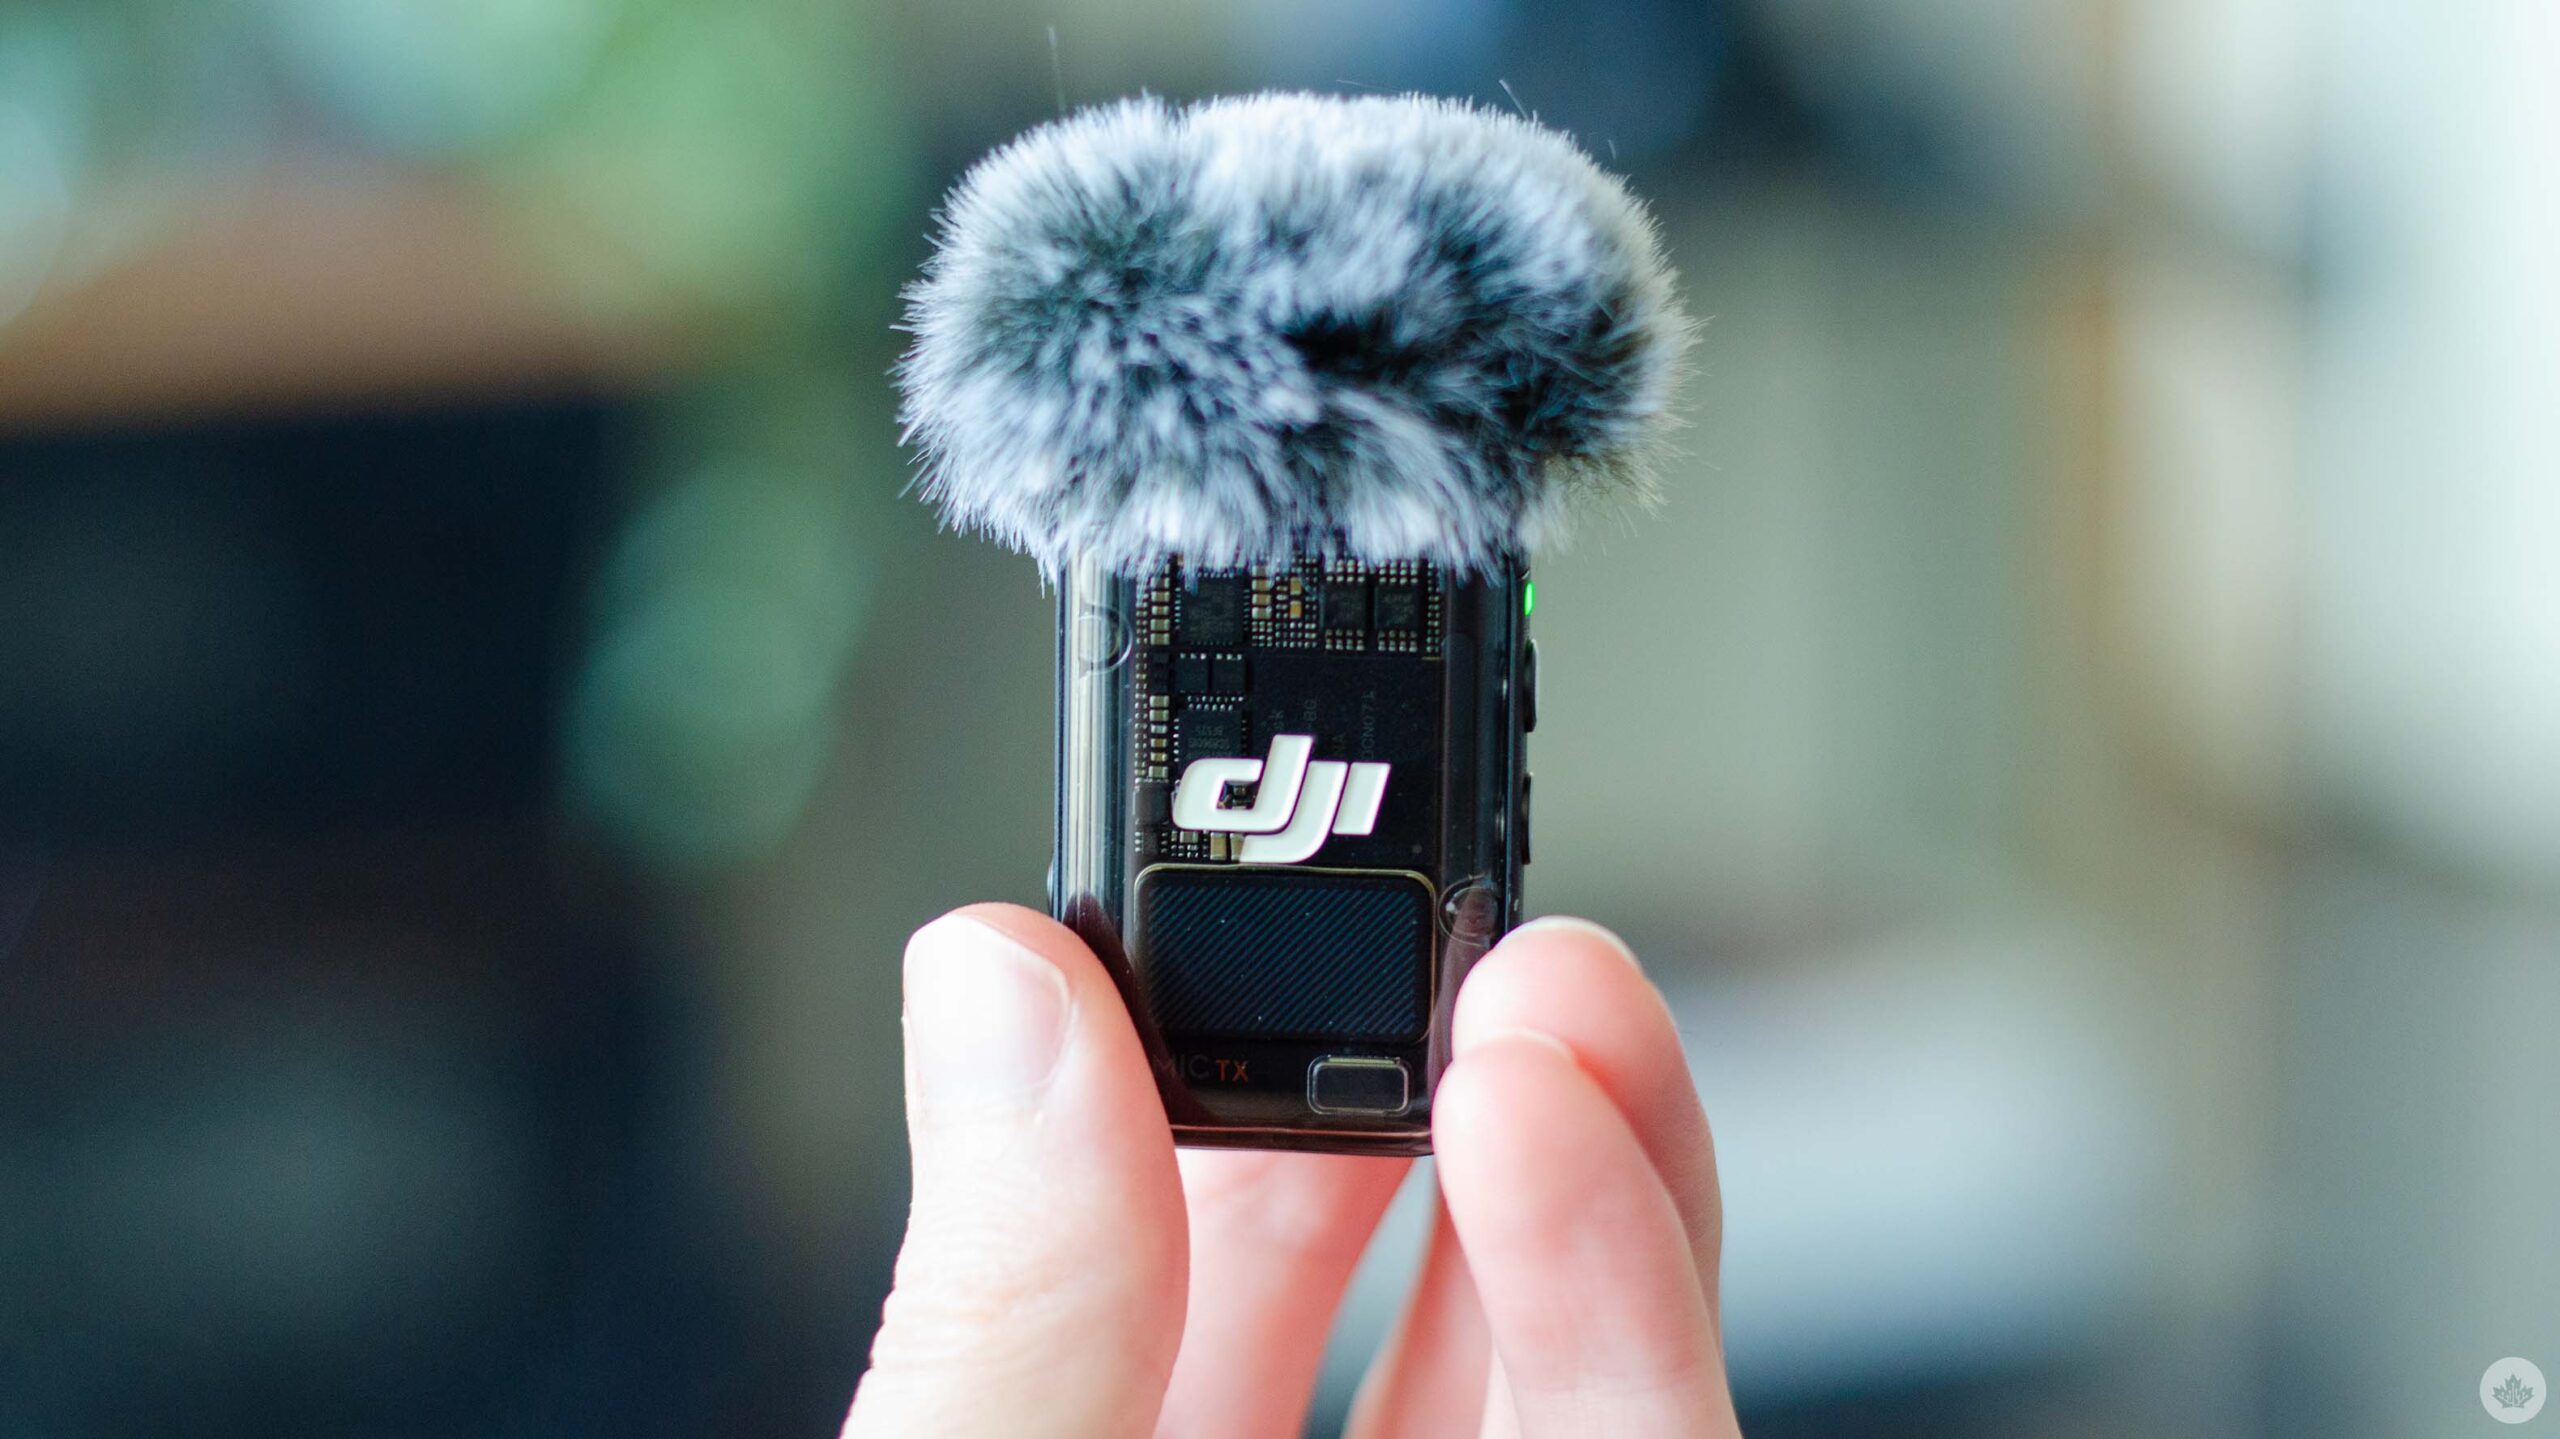 DJI's new microphone proves why it's my favourite gear company